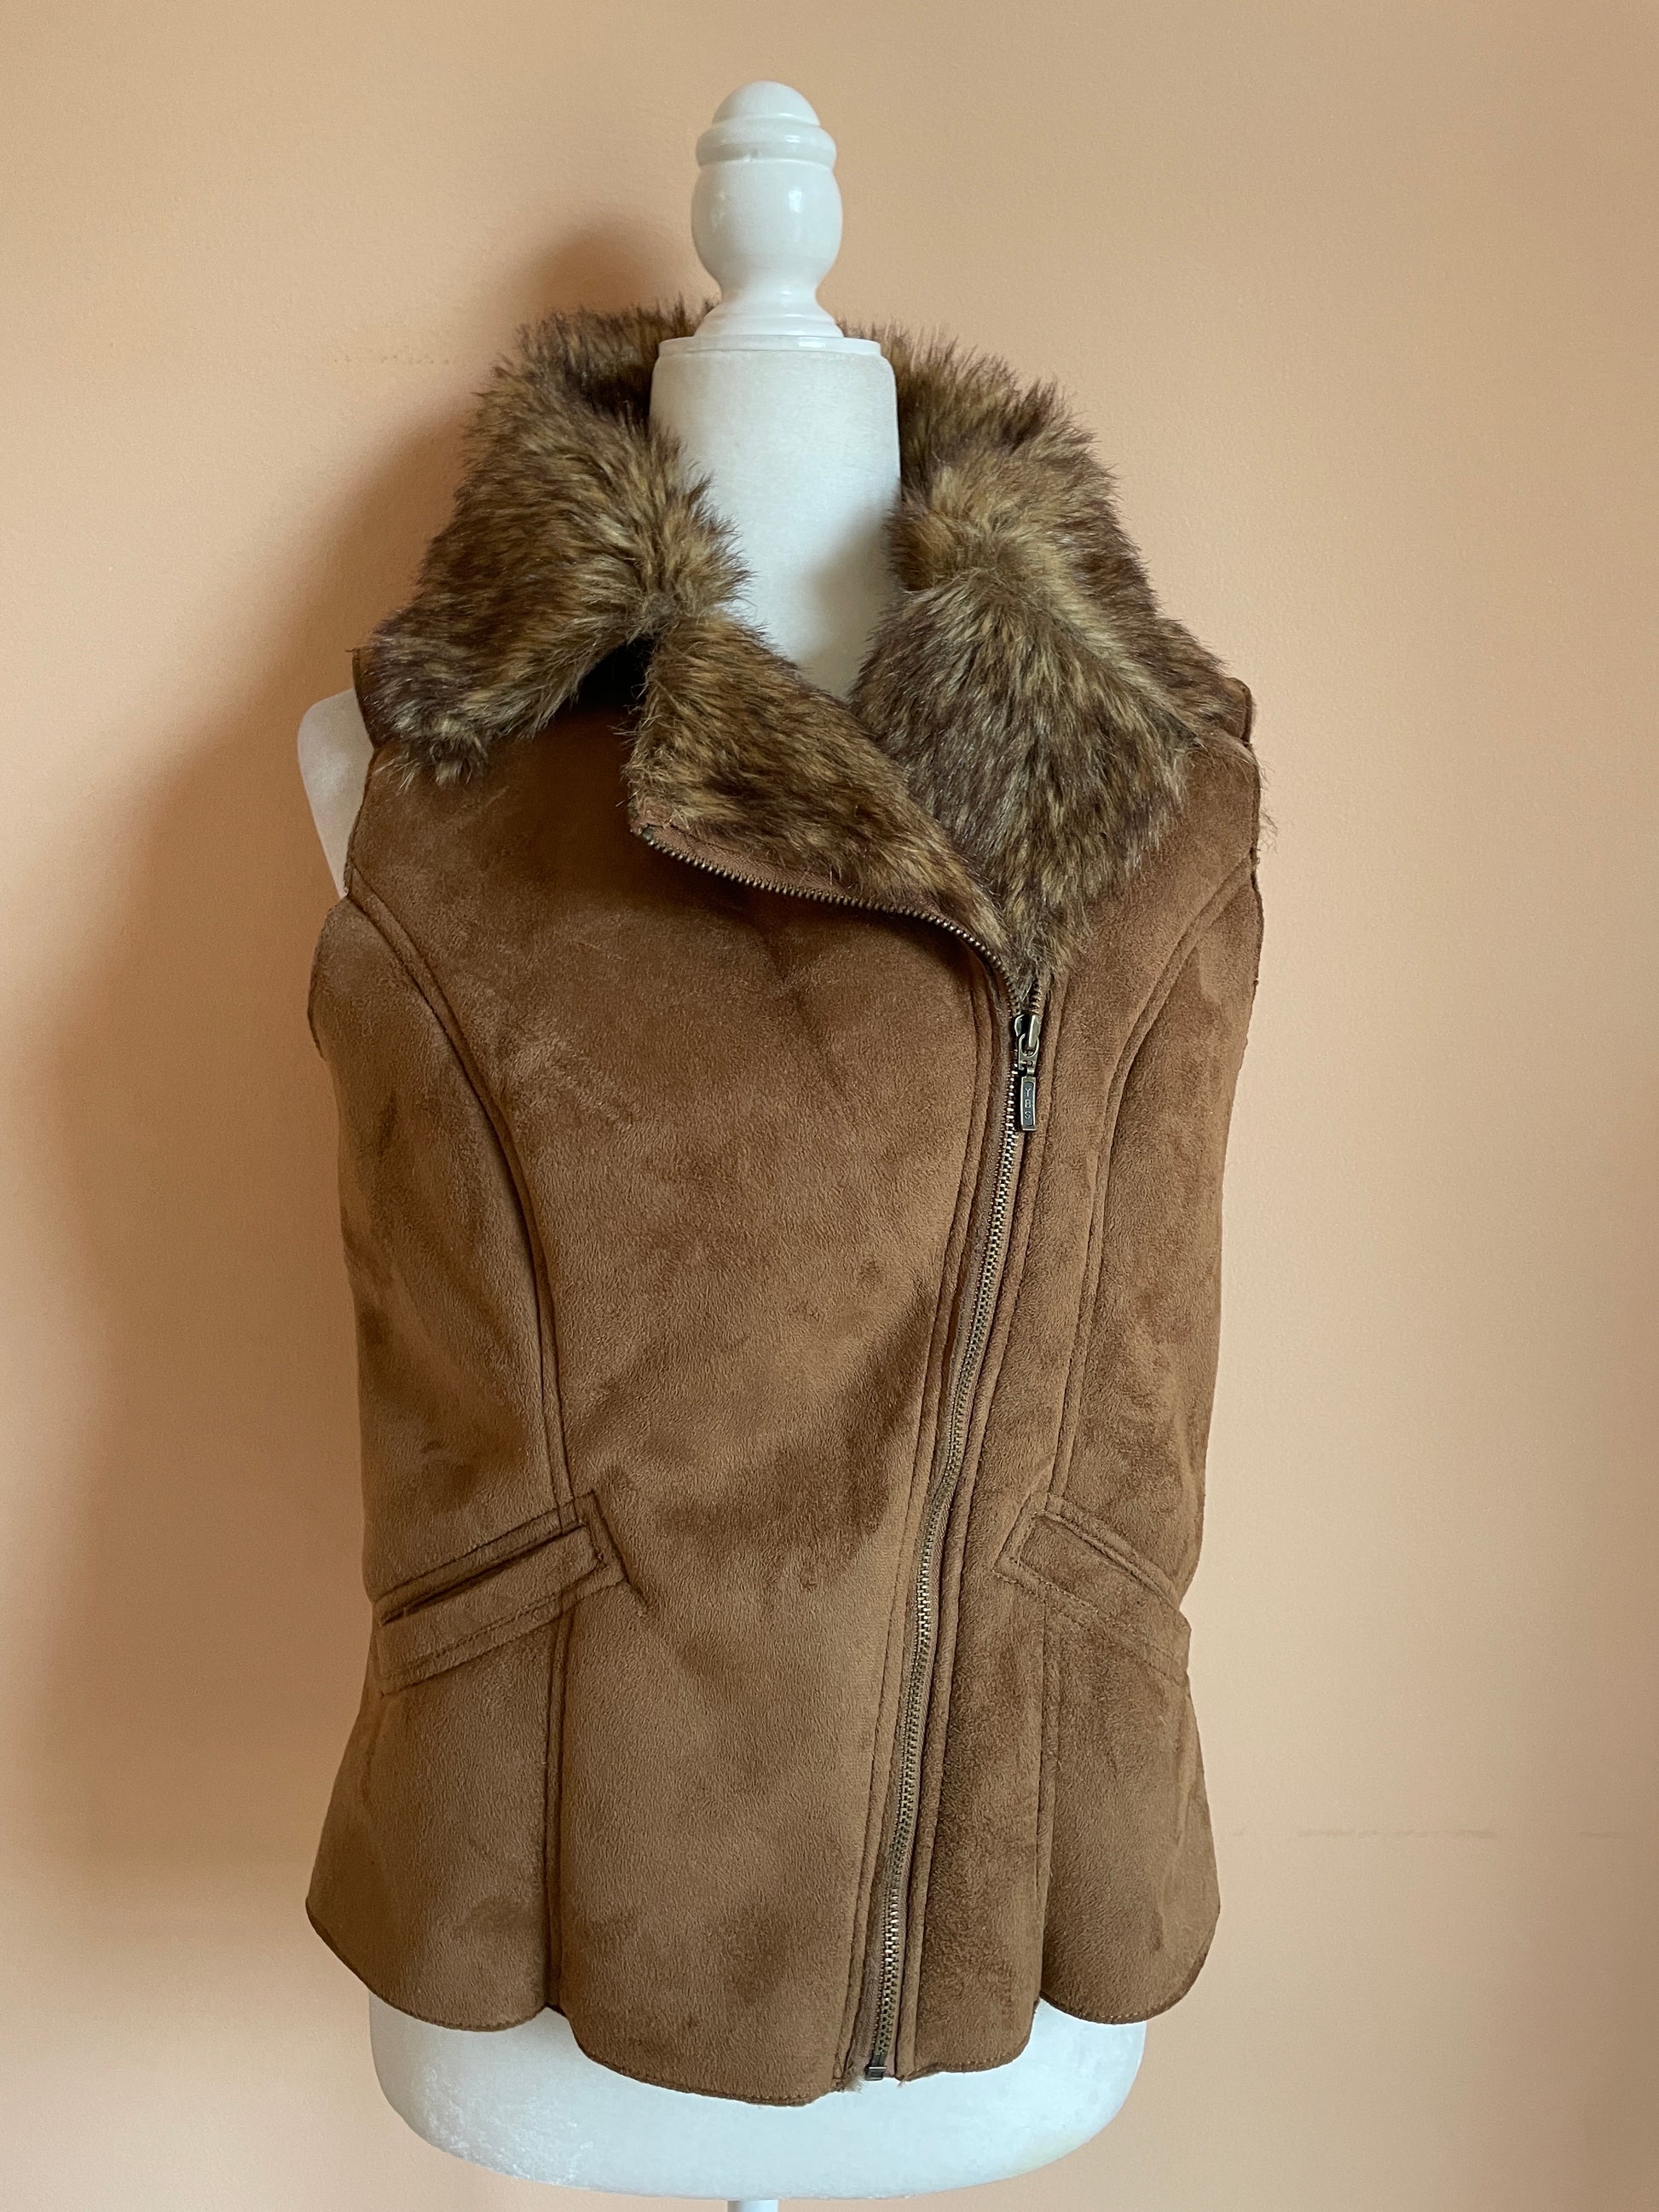 2000s faux suede vest 2000s Brown Faux Shearling Suede Sleeveless Vest